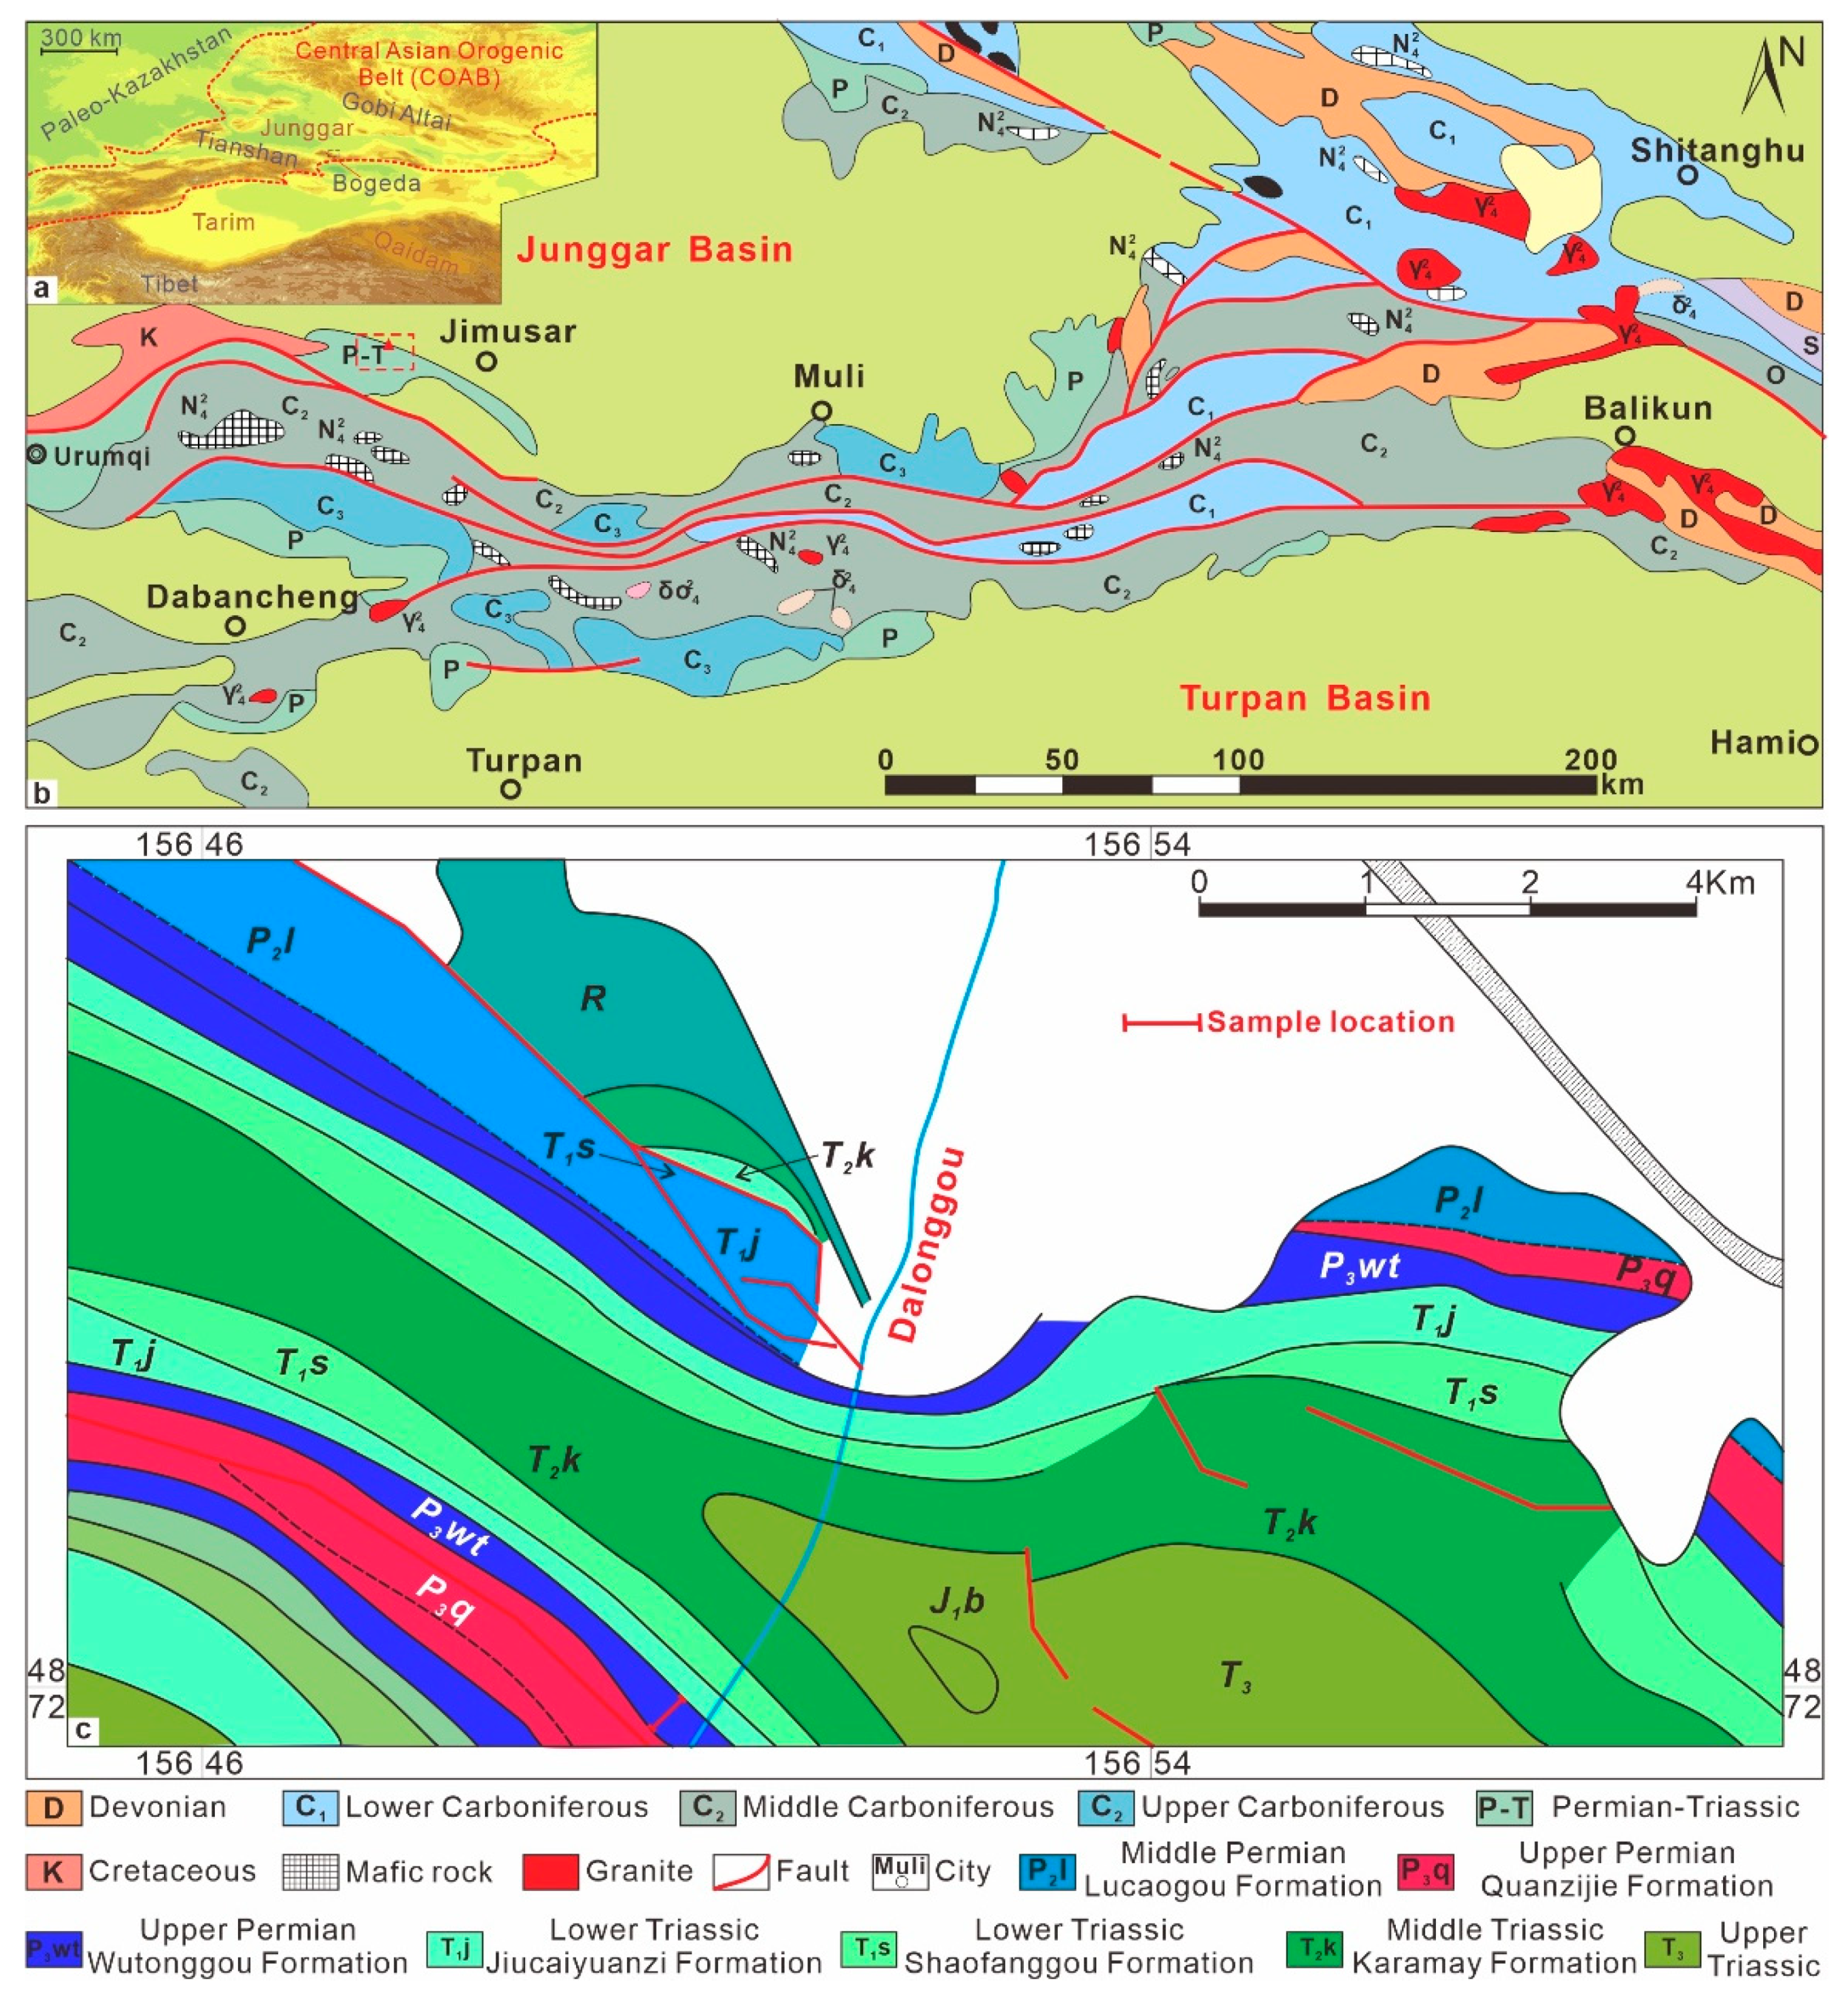 Paleozoic tectonic evolution of the eastern Central Asian Orogenic